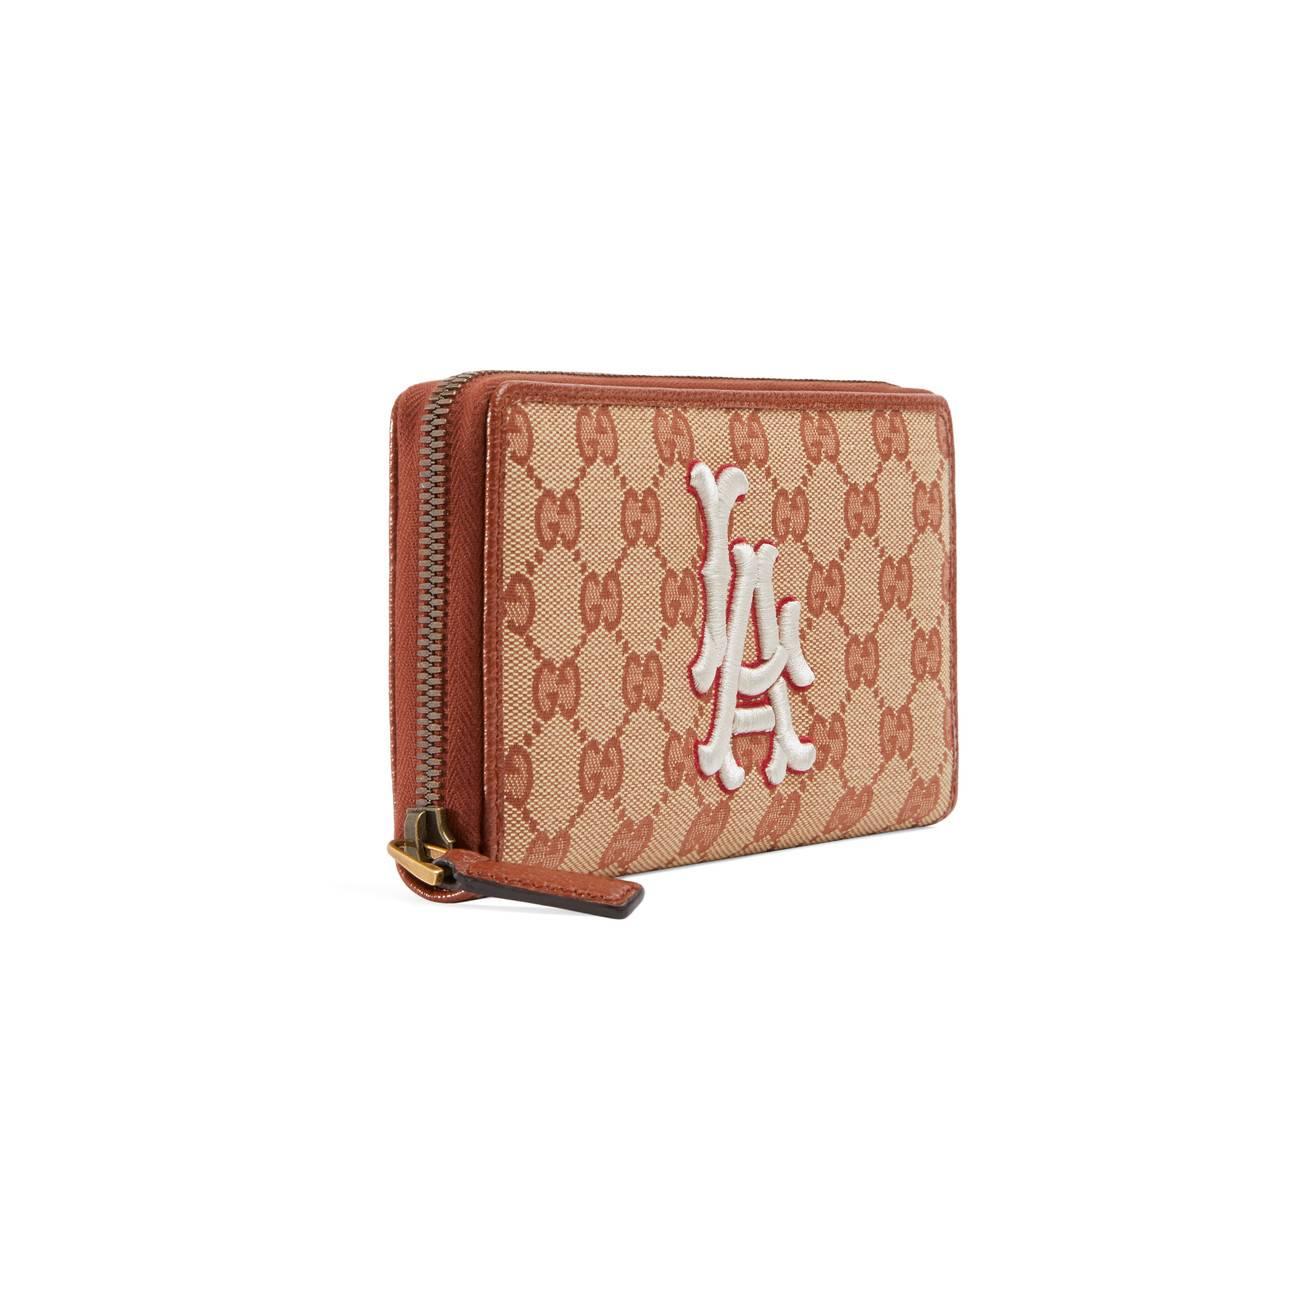 Gucci Original GG Zip Around Wallet With La Angels Patchtm in Natural for Men - Lyst